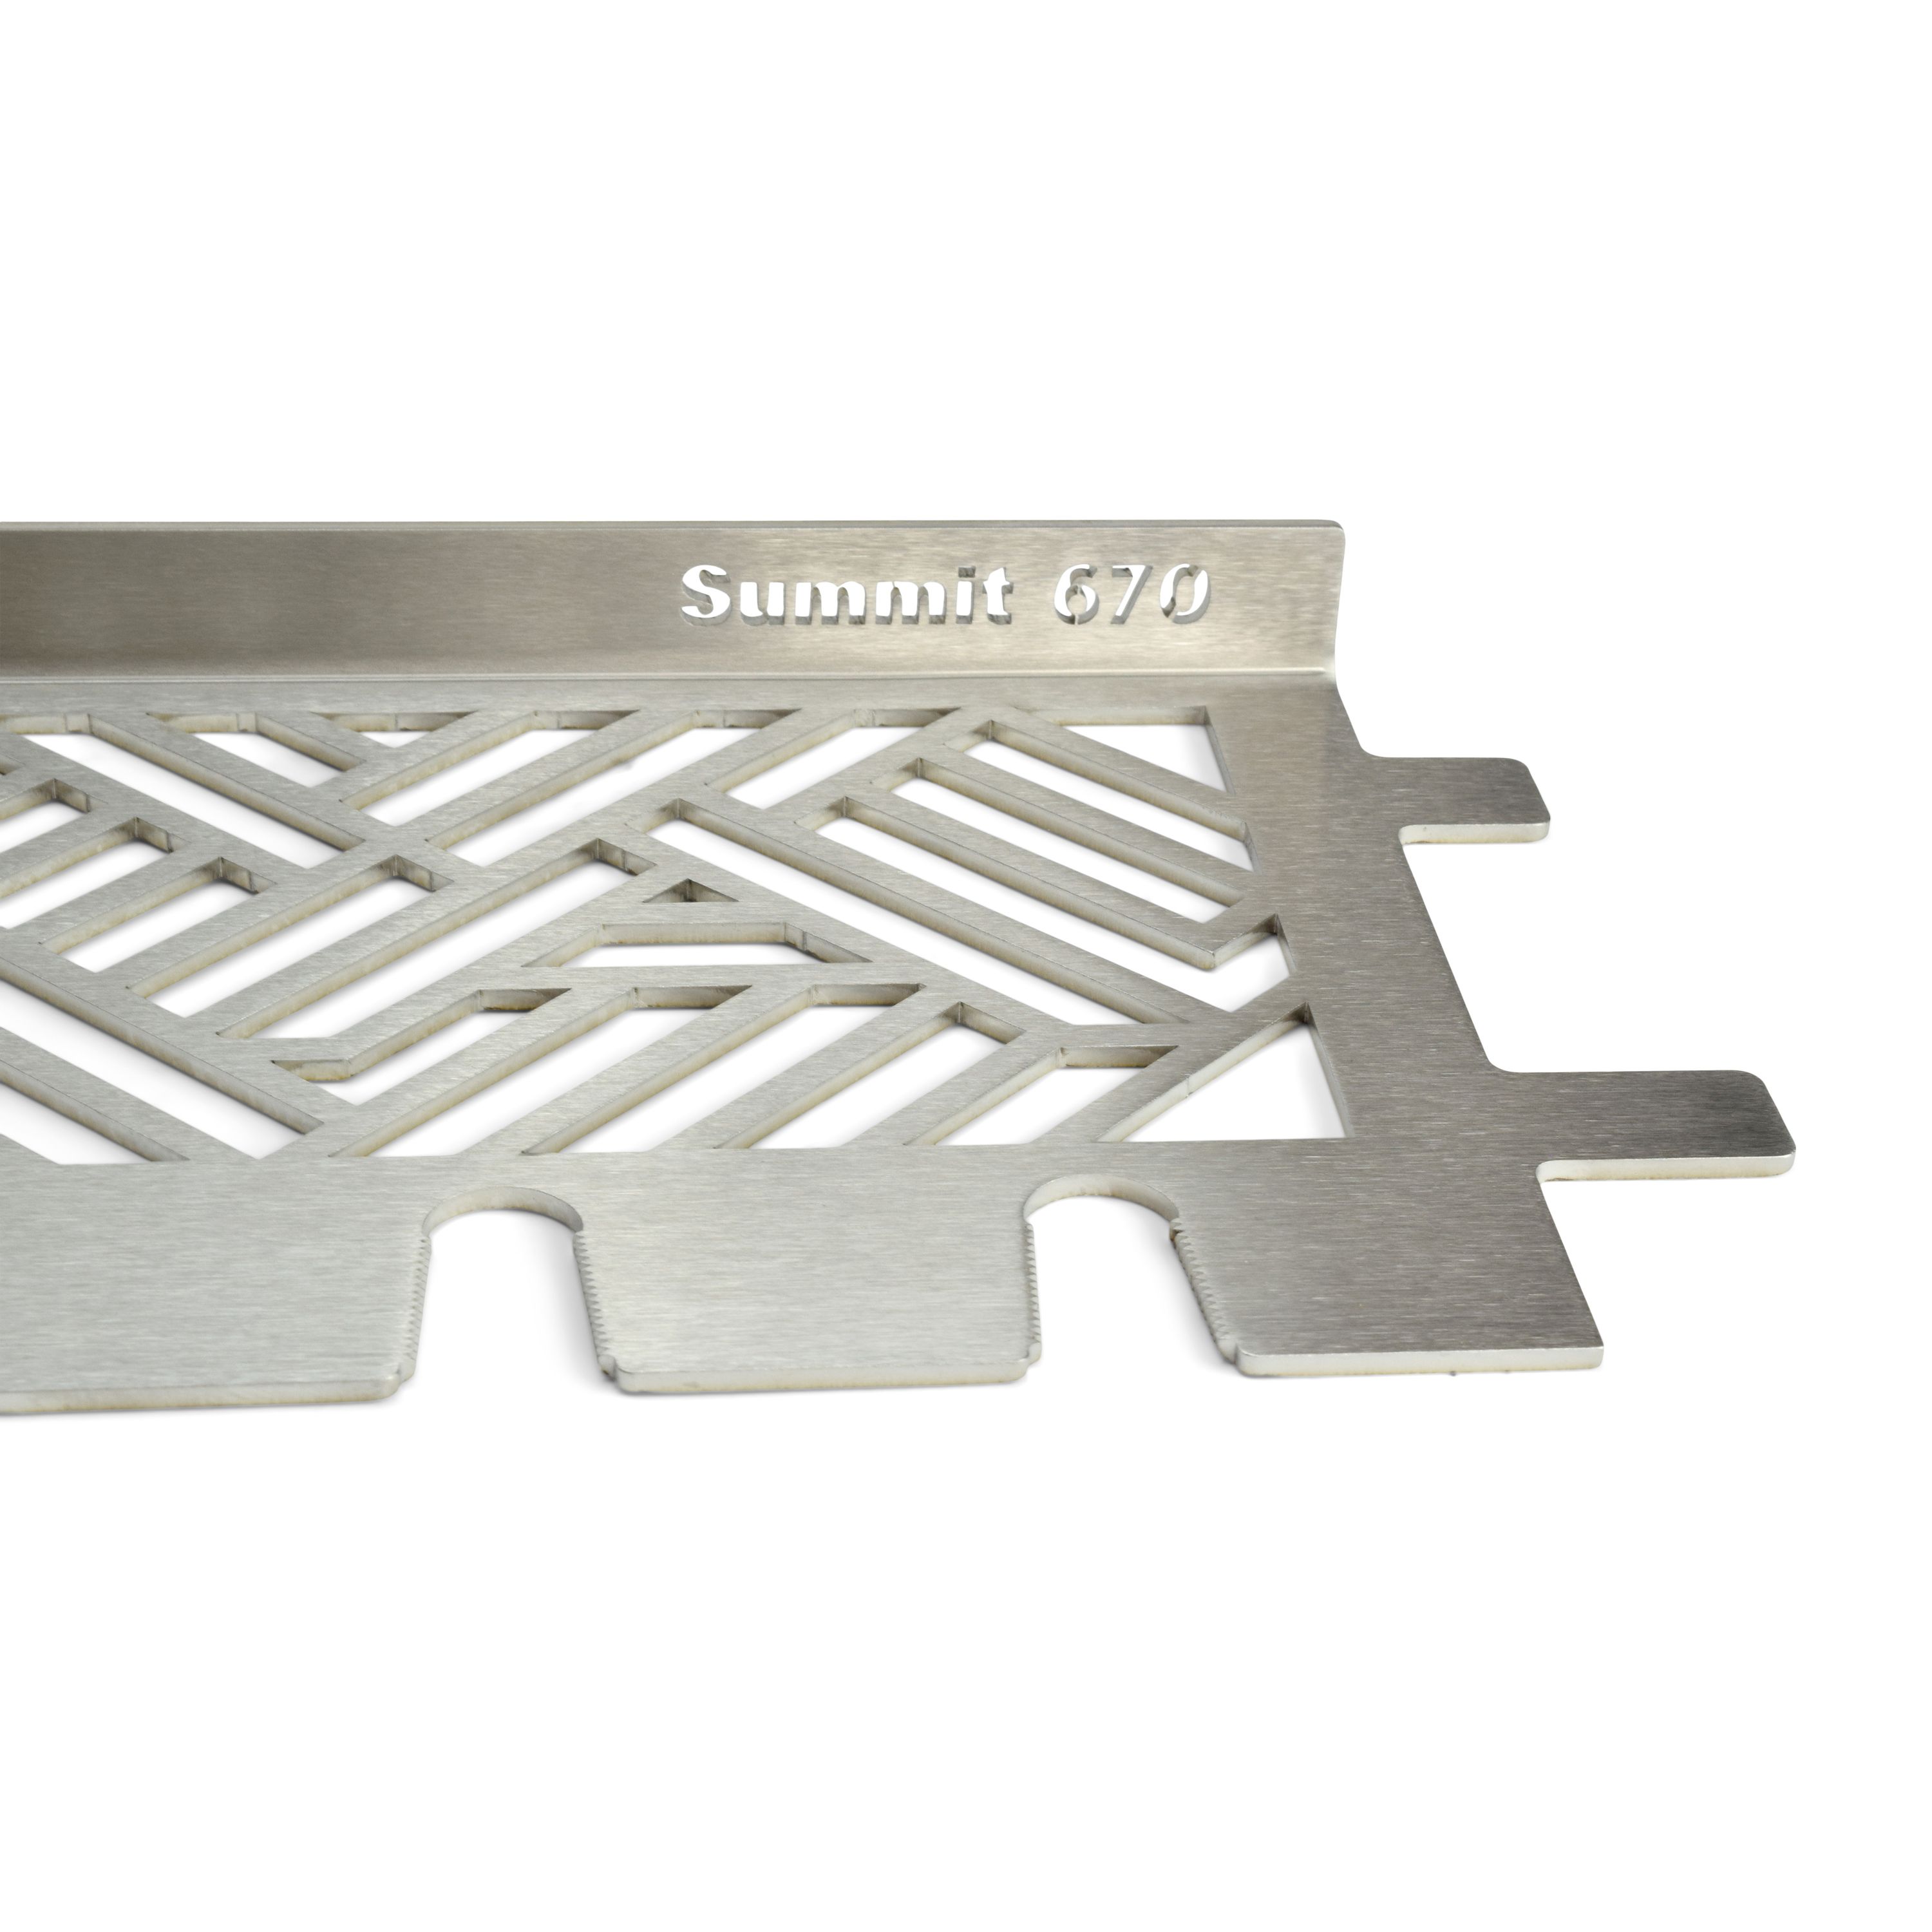 Stainless steel MultiStation for Weber Summit 600 Series - Hot Grate